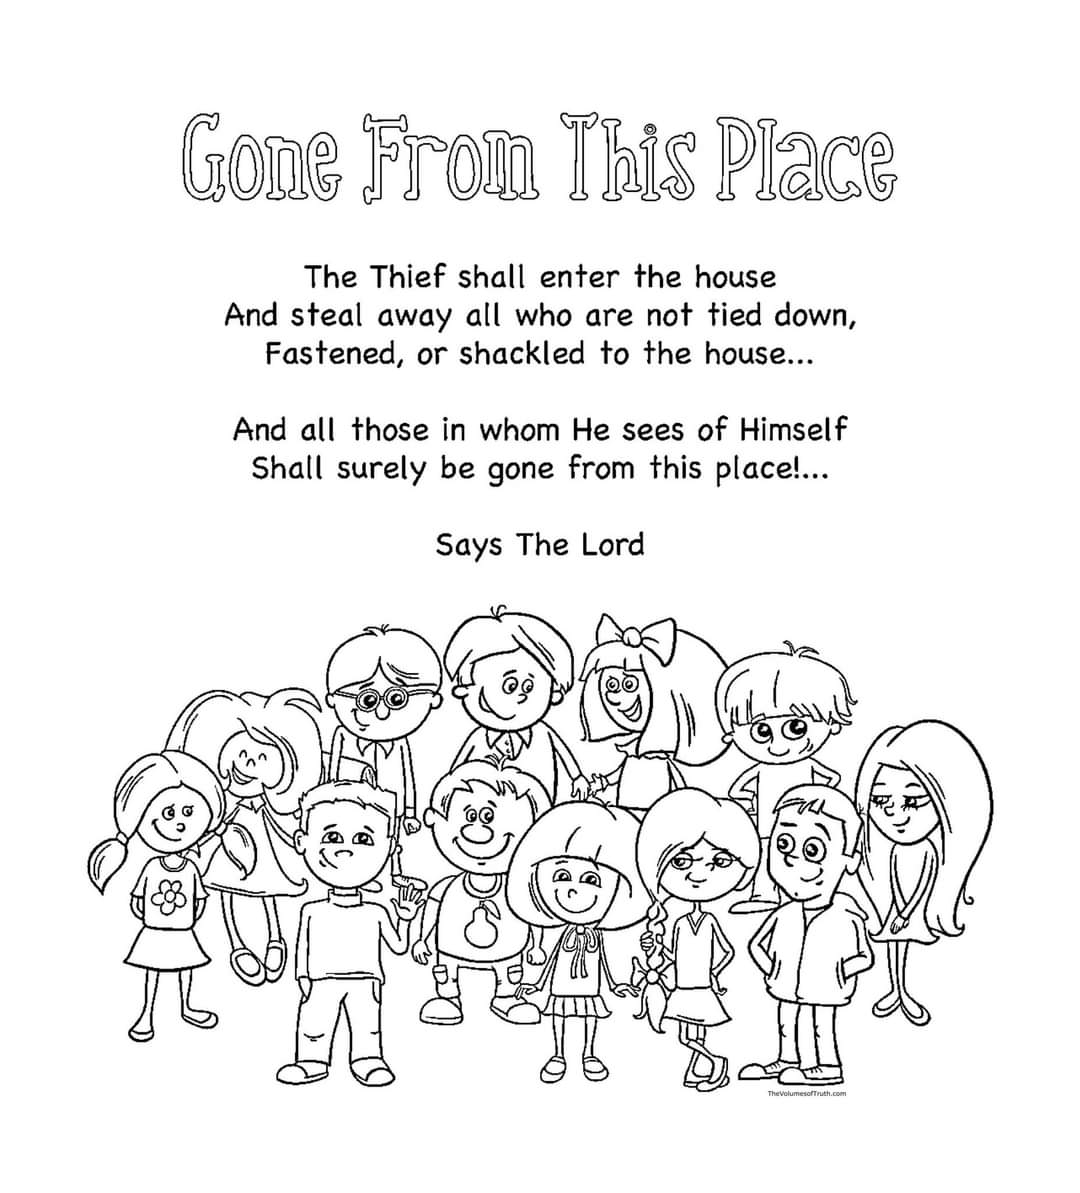 𝗚𝗼𝗻𝗲 𝗙𝗿𝗼𝗺 𝗧𝗵𝗶𝘀 𝗣𝗹𝗮𝗰𝗲 

Source: thevolumesoftruth.com/Words_To_Live_…

#TheVolumesofTruth #ColoringPage #Scripture #Scripturecoloring #coloringtherapy #Jesus #Christ #TheMessiah #Yahushua #TheWord #WordofGod #LettersFromGod #God #YAHUWAH #rapture #RaptureReady #wordstoliveby